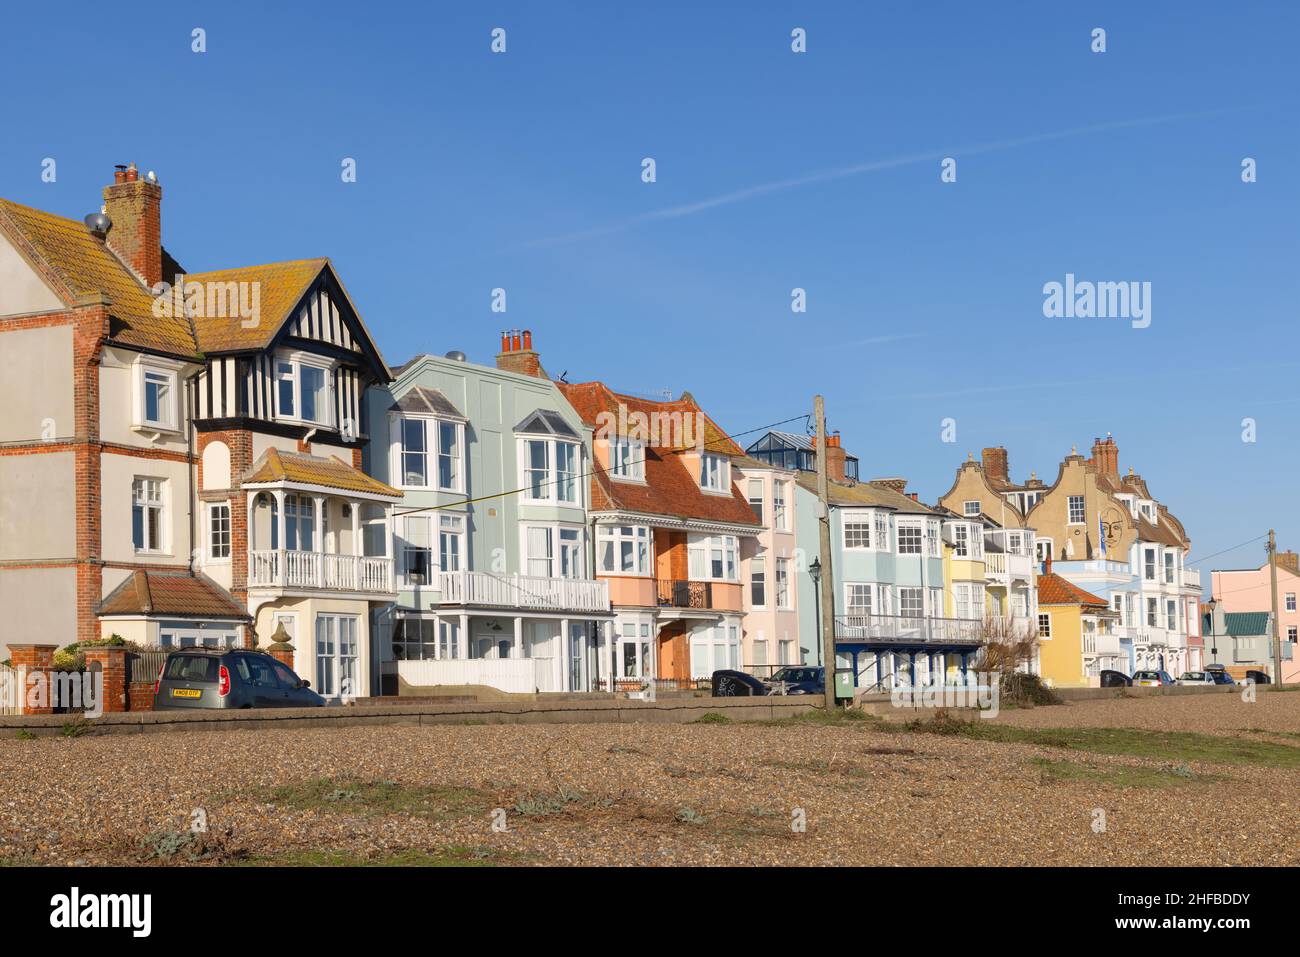 View of the colourful buildings on Crag Path facing the seafront in Aldeburgh. UK Stock Photo